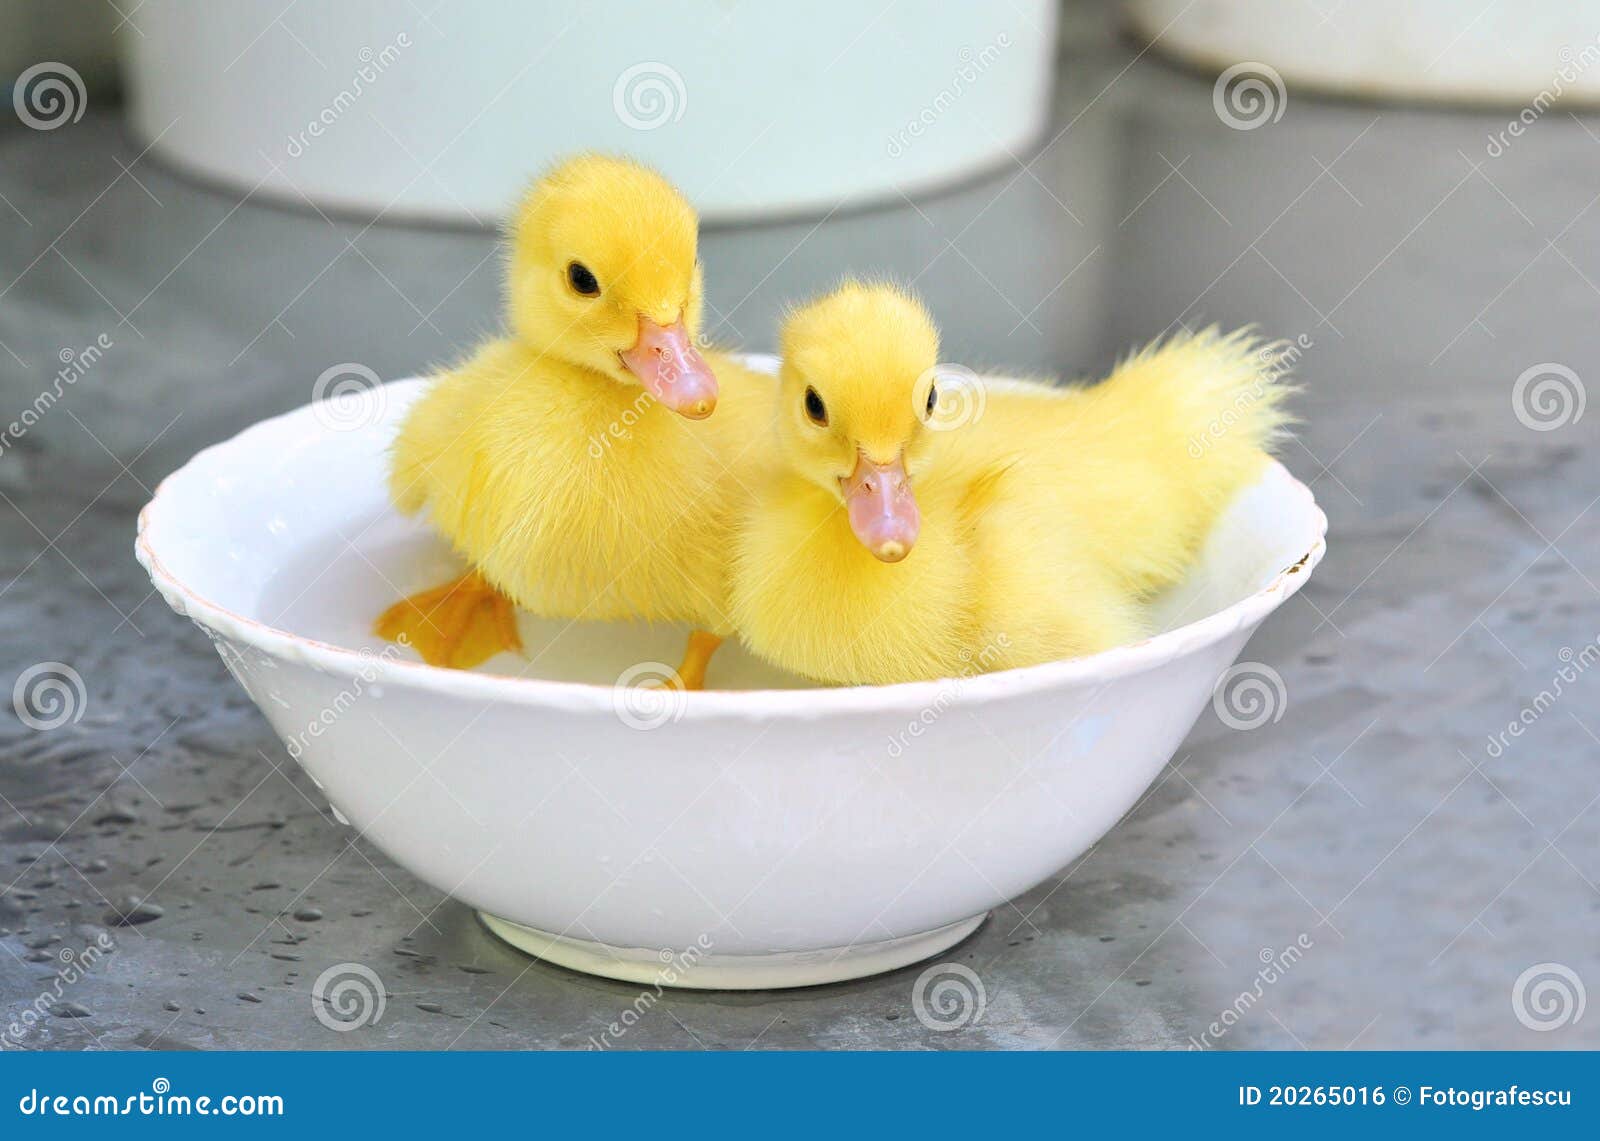 two yellow baby ducks in a bowl